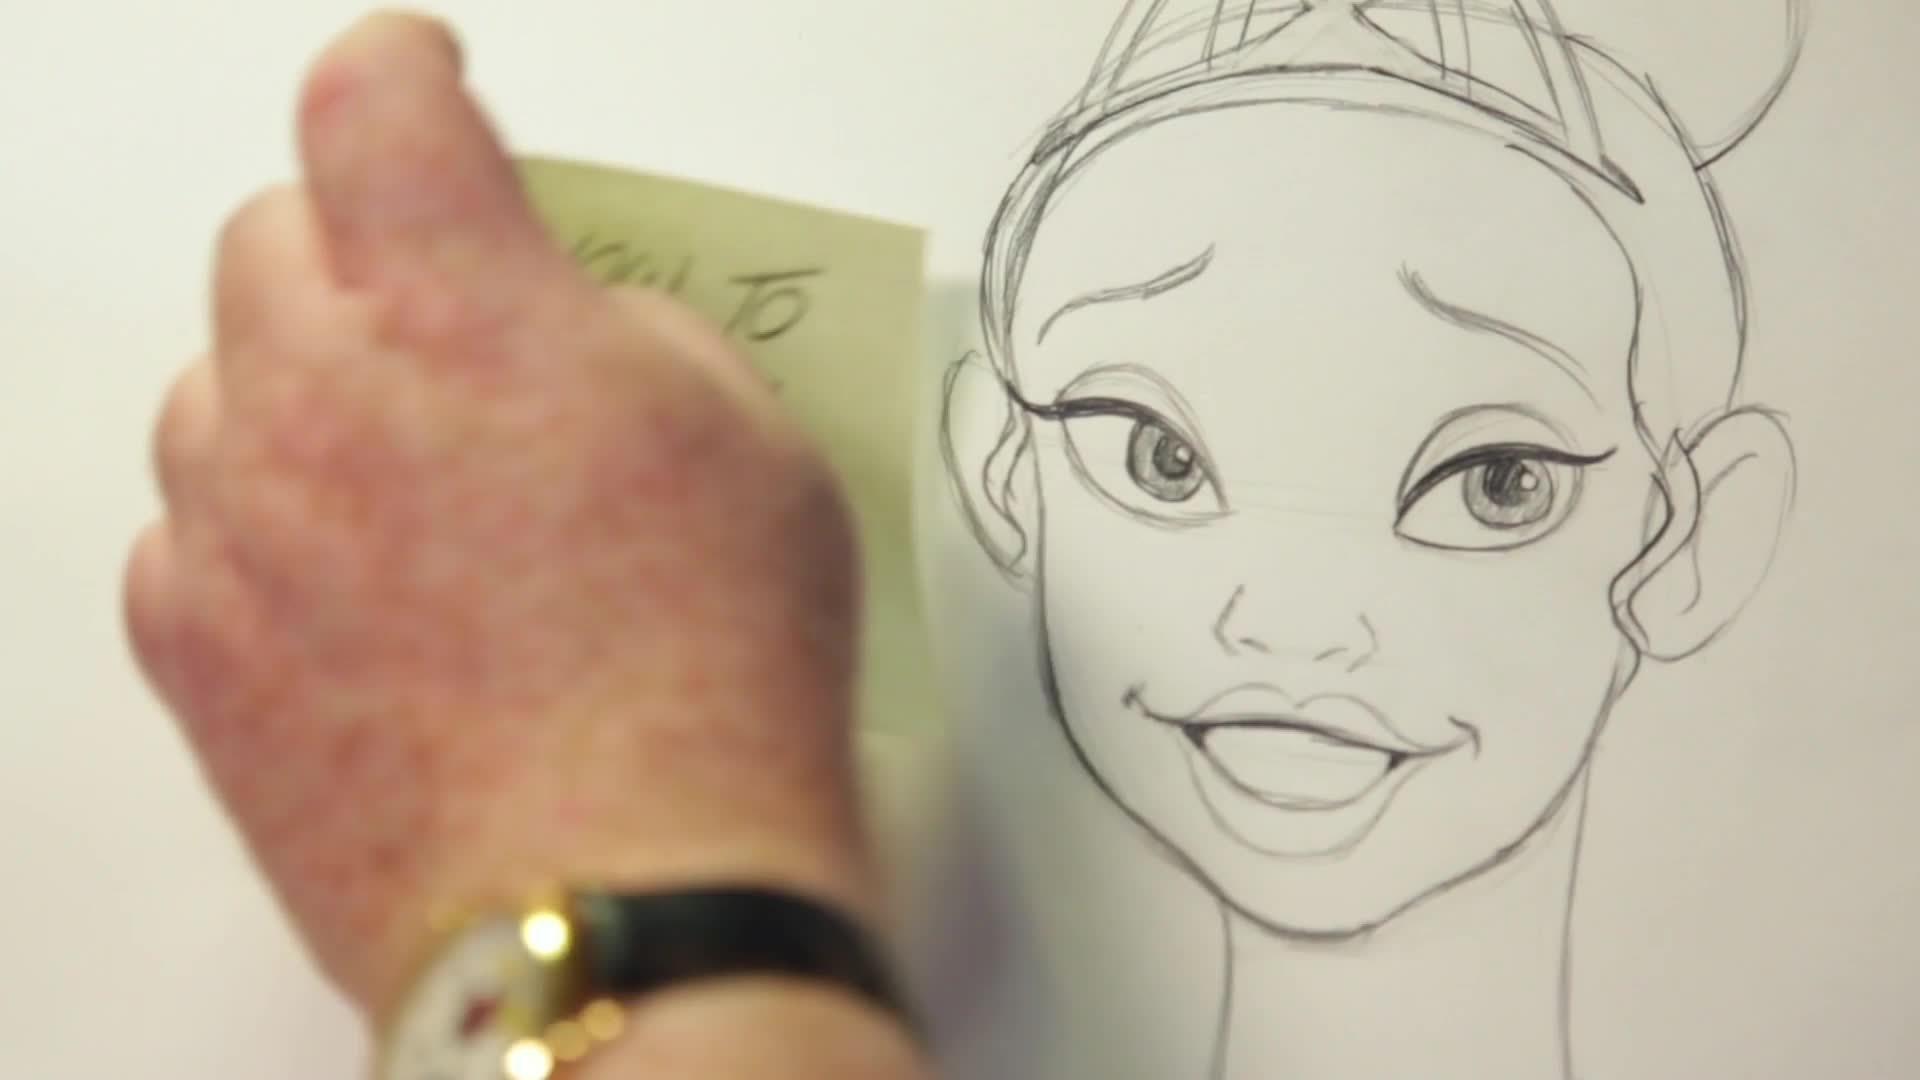 Learn How to Draw Elsa, the Snow Queen in 10 Easy Steps